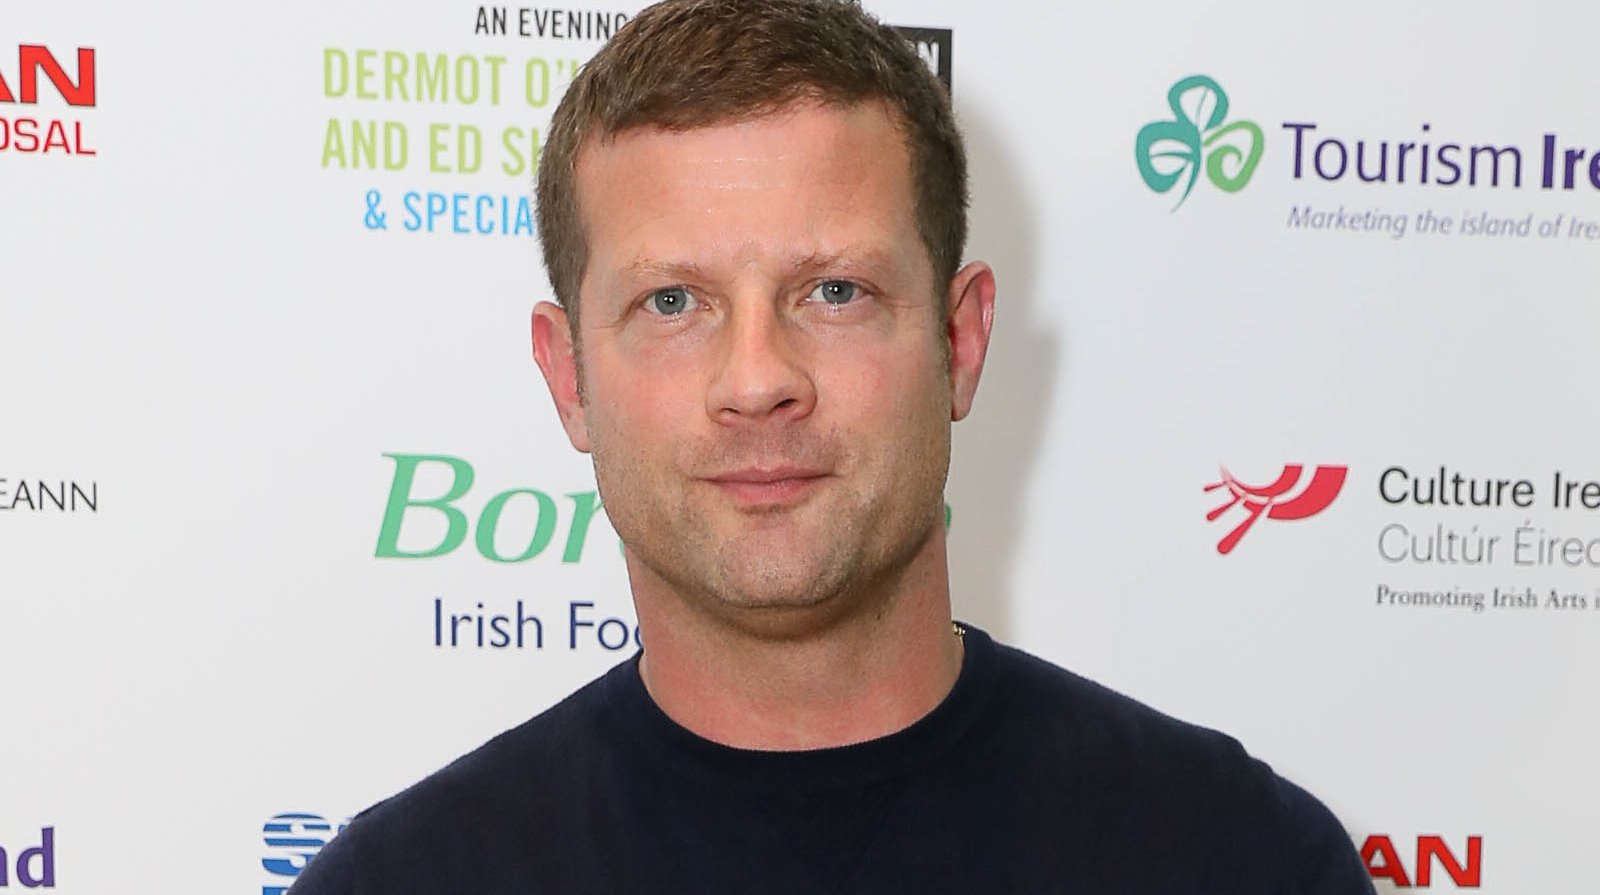 Dermot O'Leary reveals that he had Covid-19